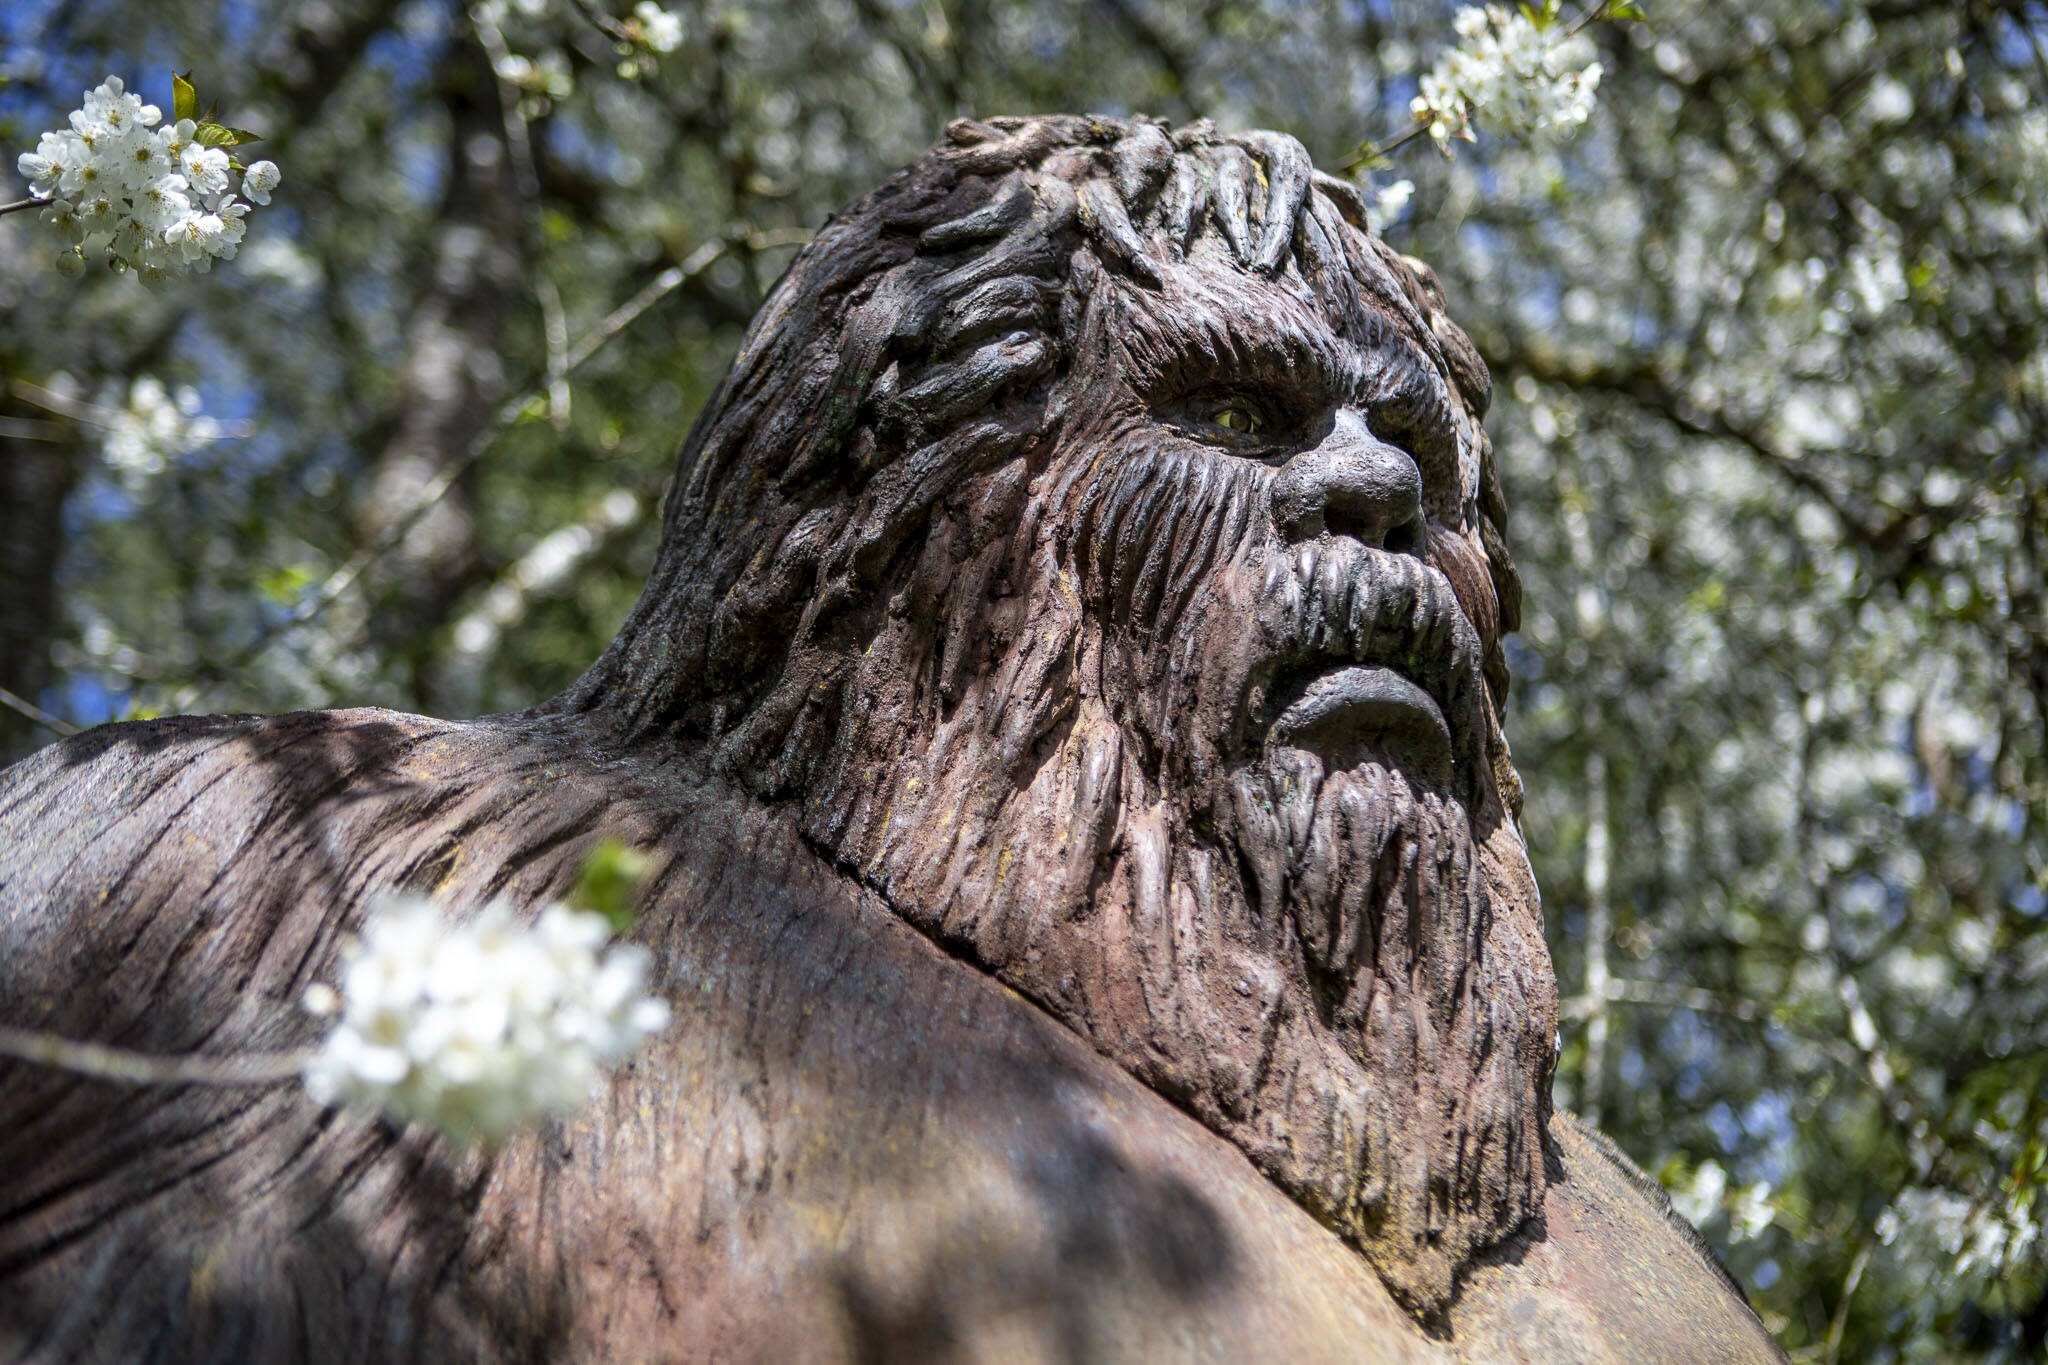 The 1,500-pound Sasquatch: Bigfoot comes to life in woods near Monroe | HeraldNet.com